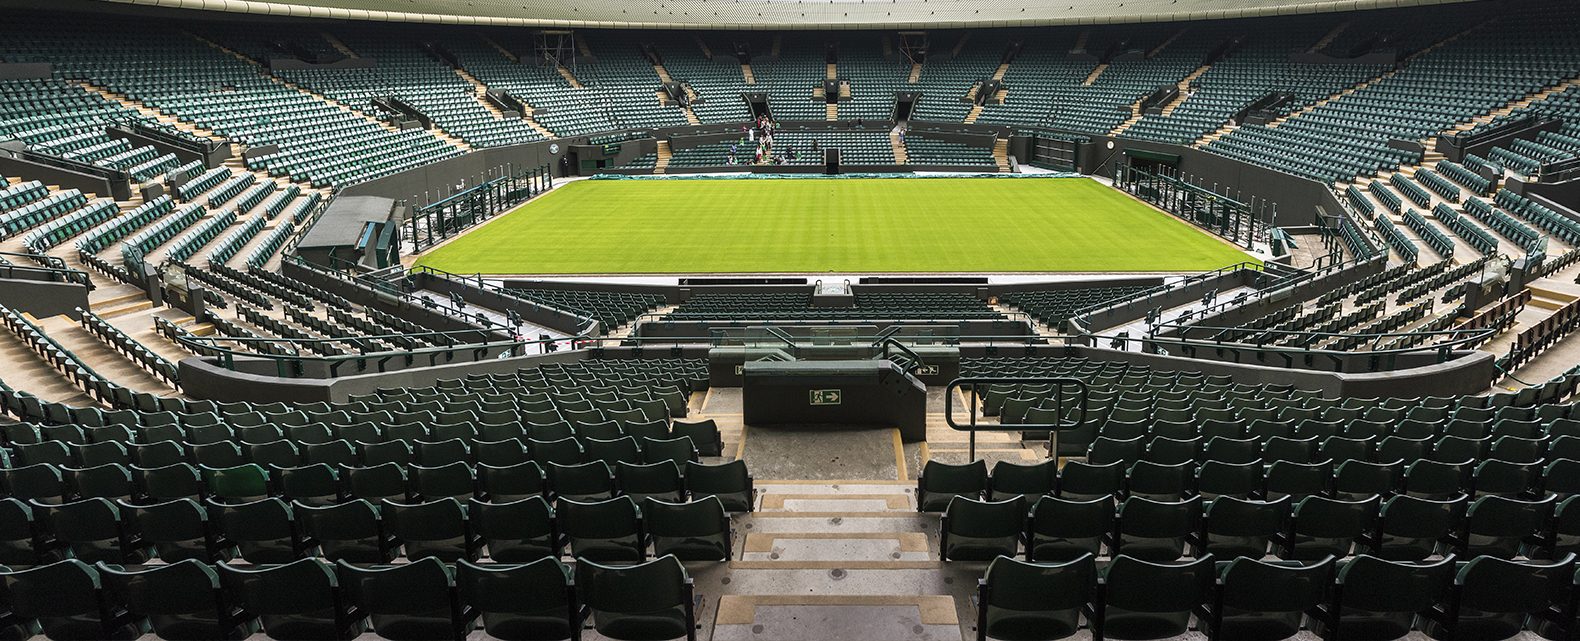 The All England Lawn Tennis Club, No 1 Court inside the seating shot